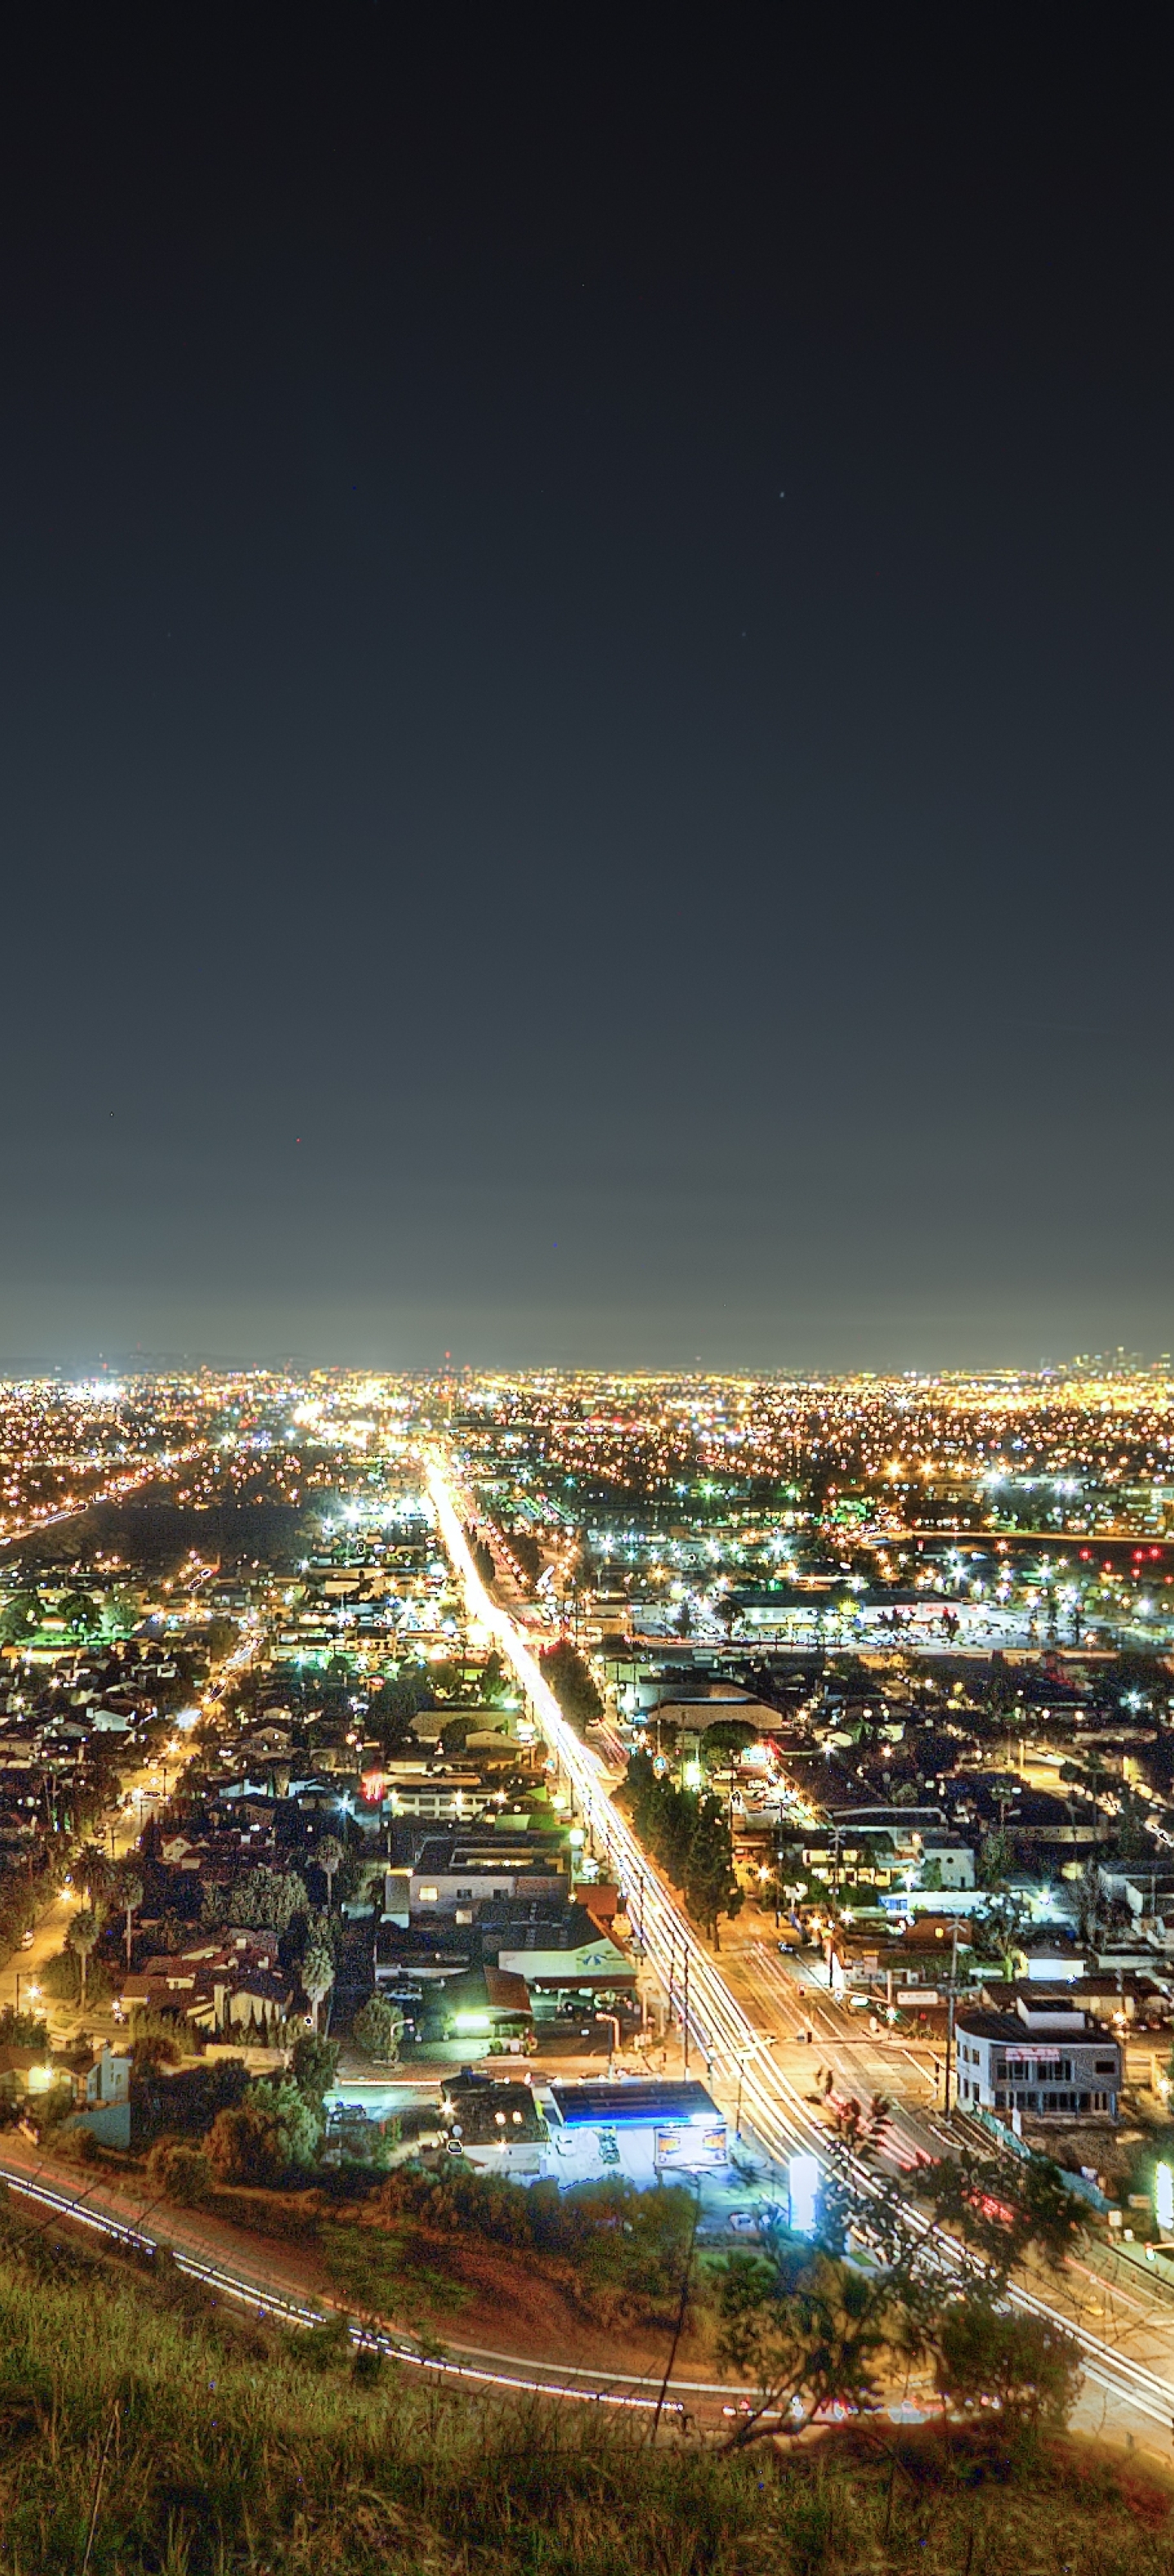 A city at night lit up with lights from the buildings below. - Los Angeles, California